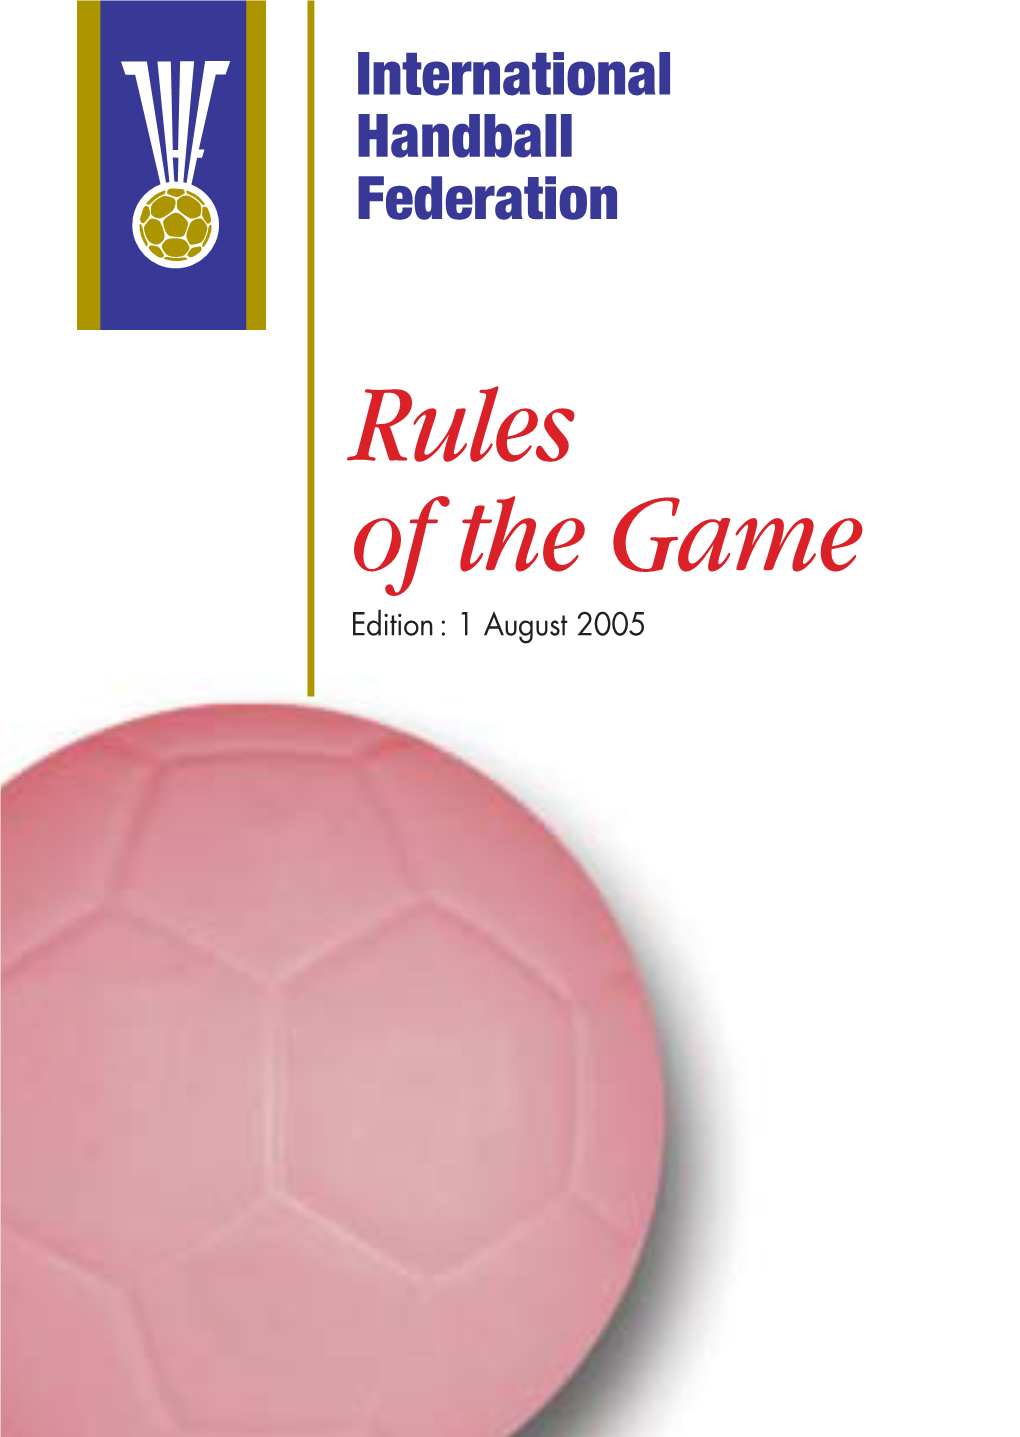 IHF Rules of the Game